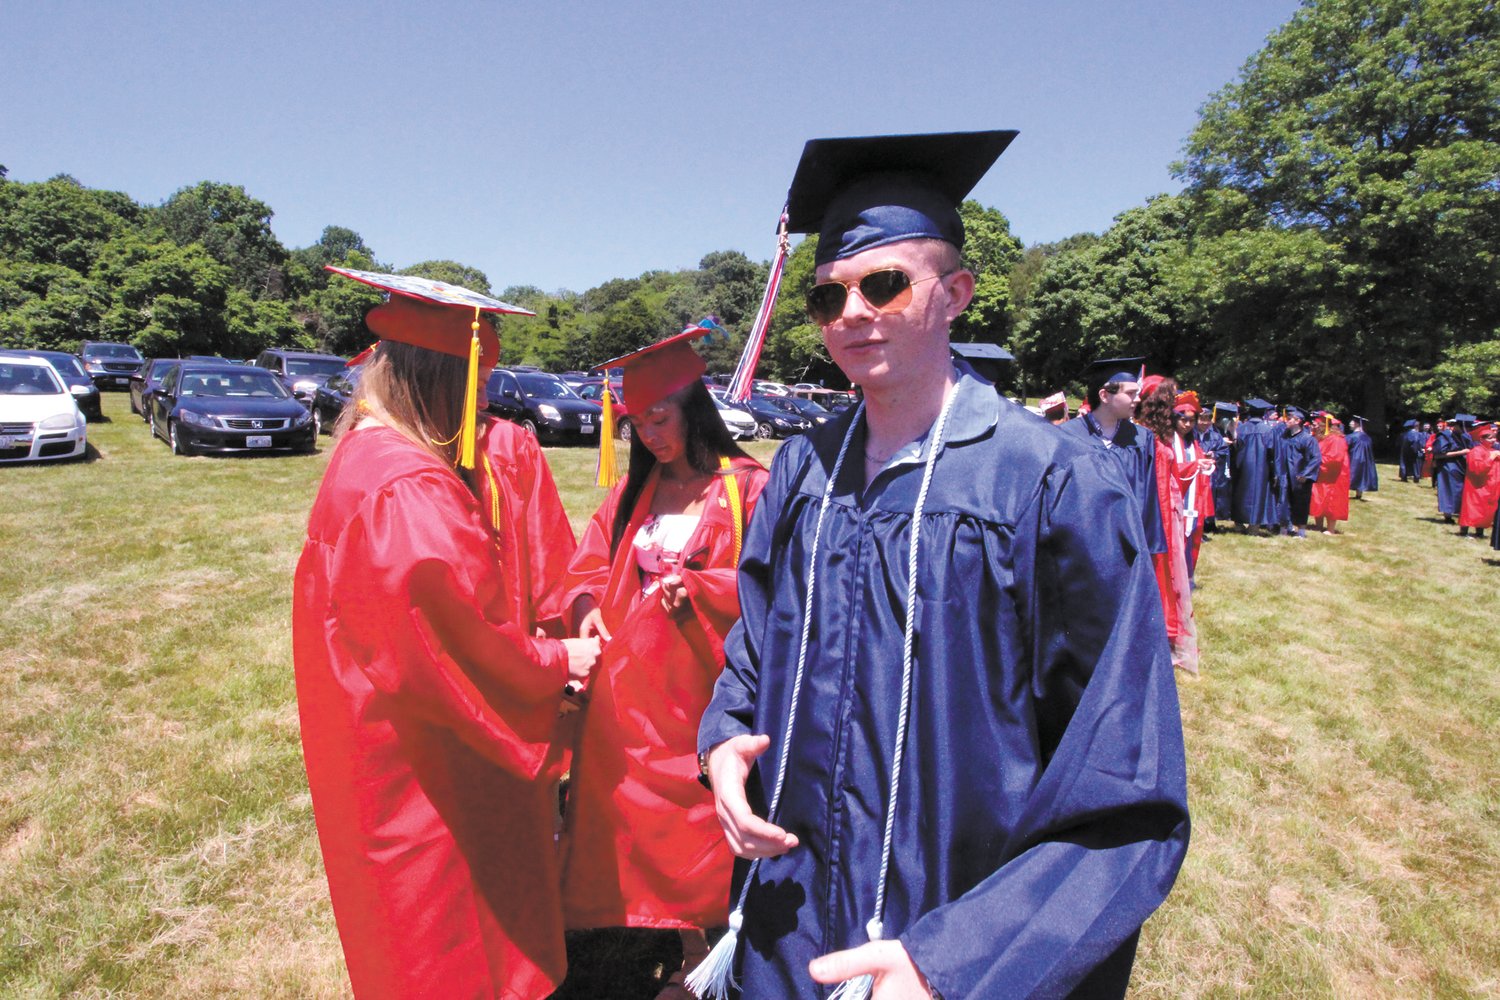 STEPPING INTO THE WORKFORCE: (right) David McCurry, who received a Toll Gate diploma while completing the electrical program at the Warwick Area Career and Technical Center has lined up a position in the repair of HVAC systems. “The trades is where it’s at,” he said while waiting to commencement exercises to start.